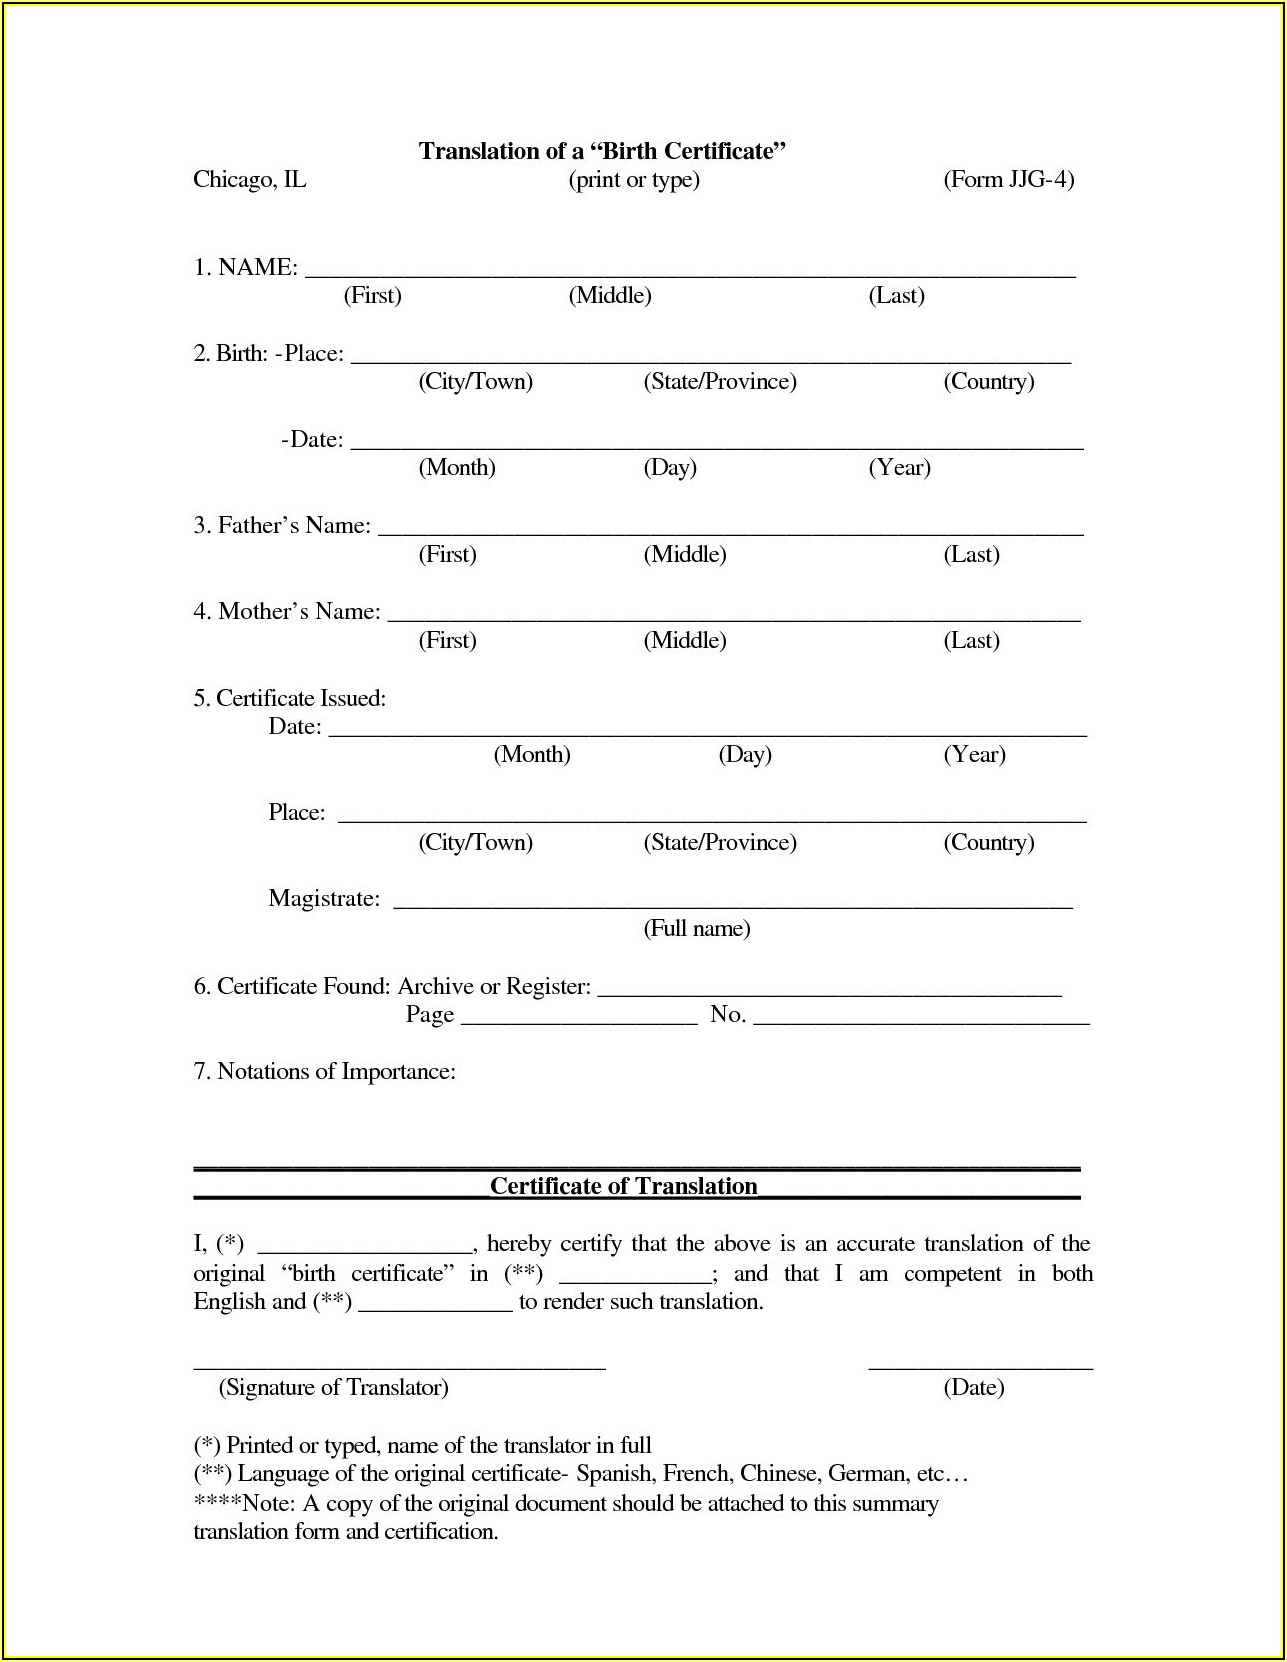 Marriage Certificate Translation Template Spanish To English